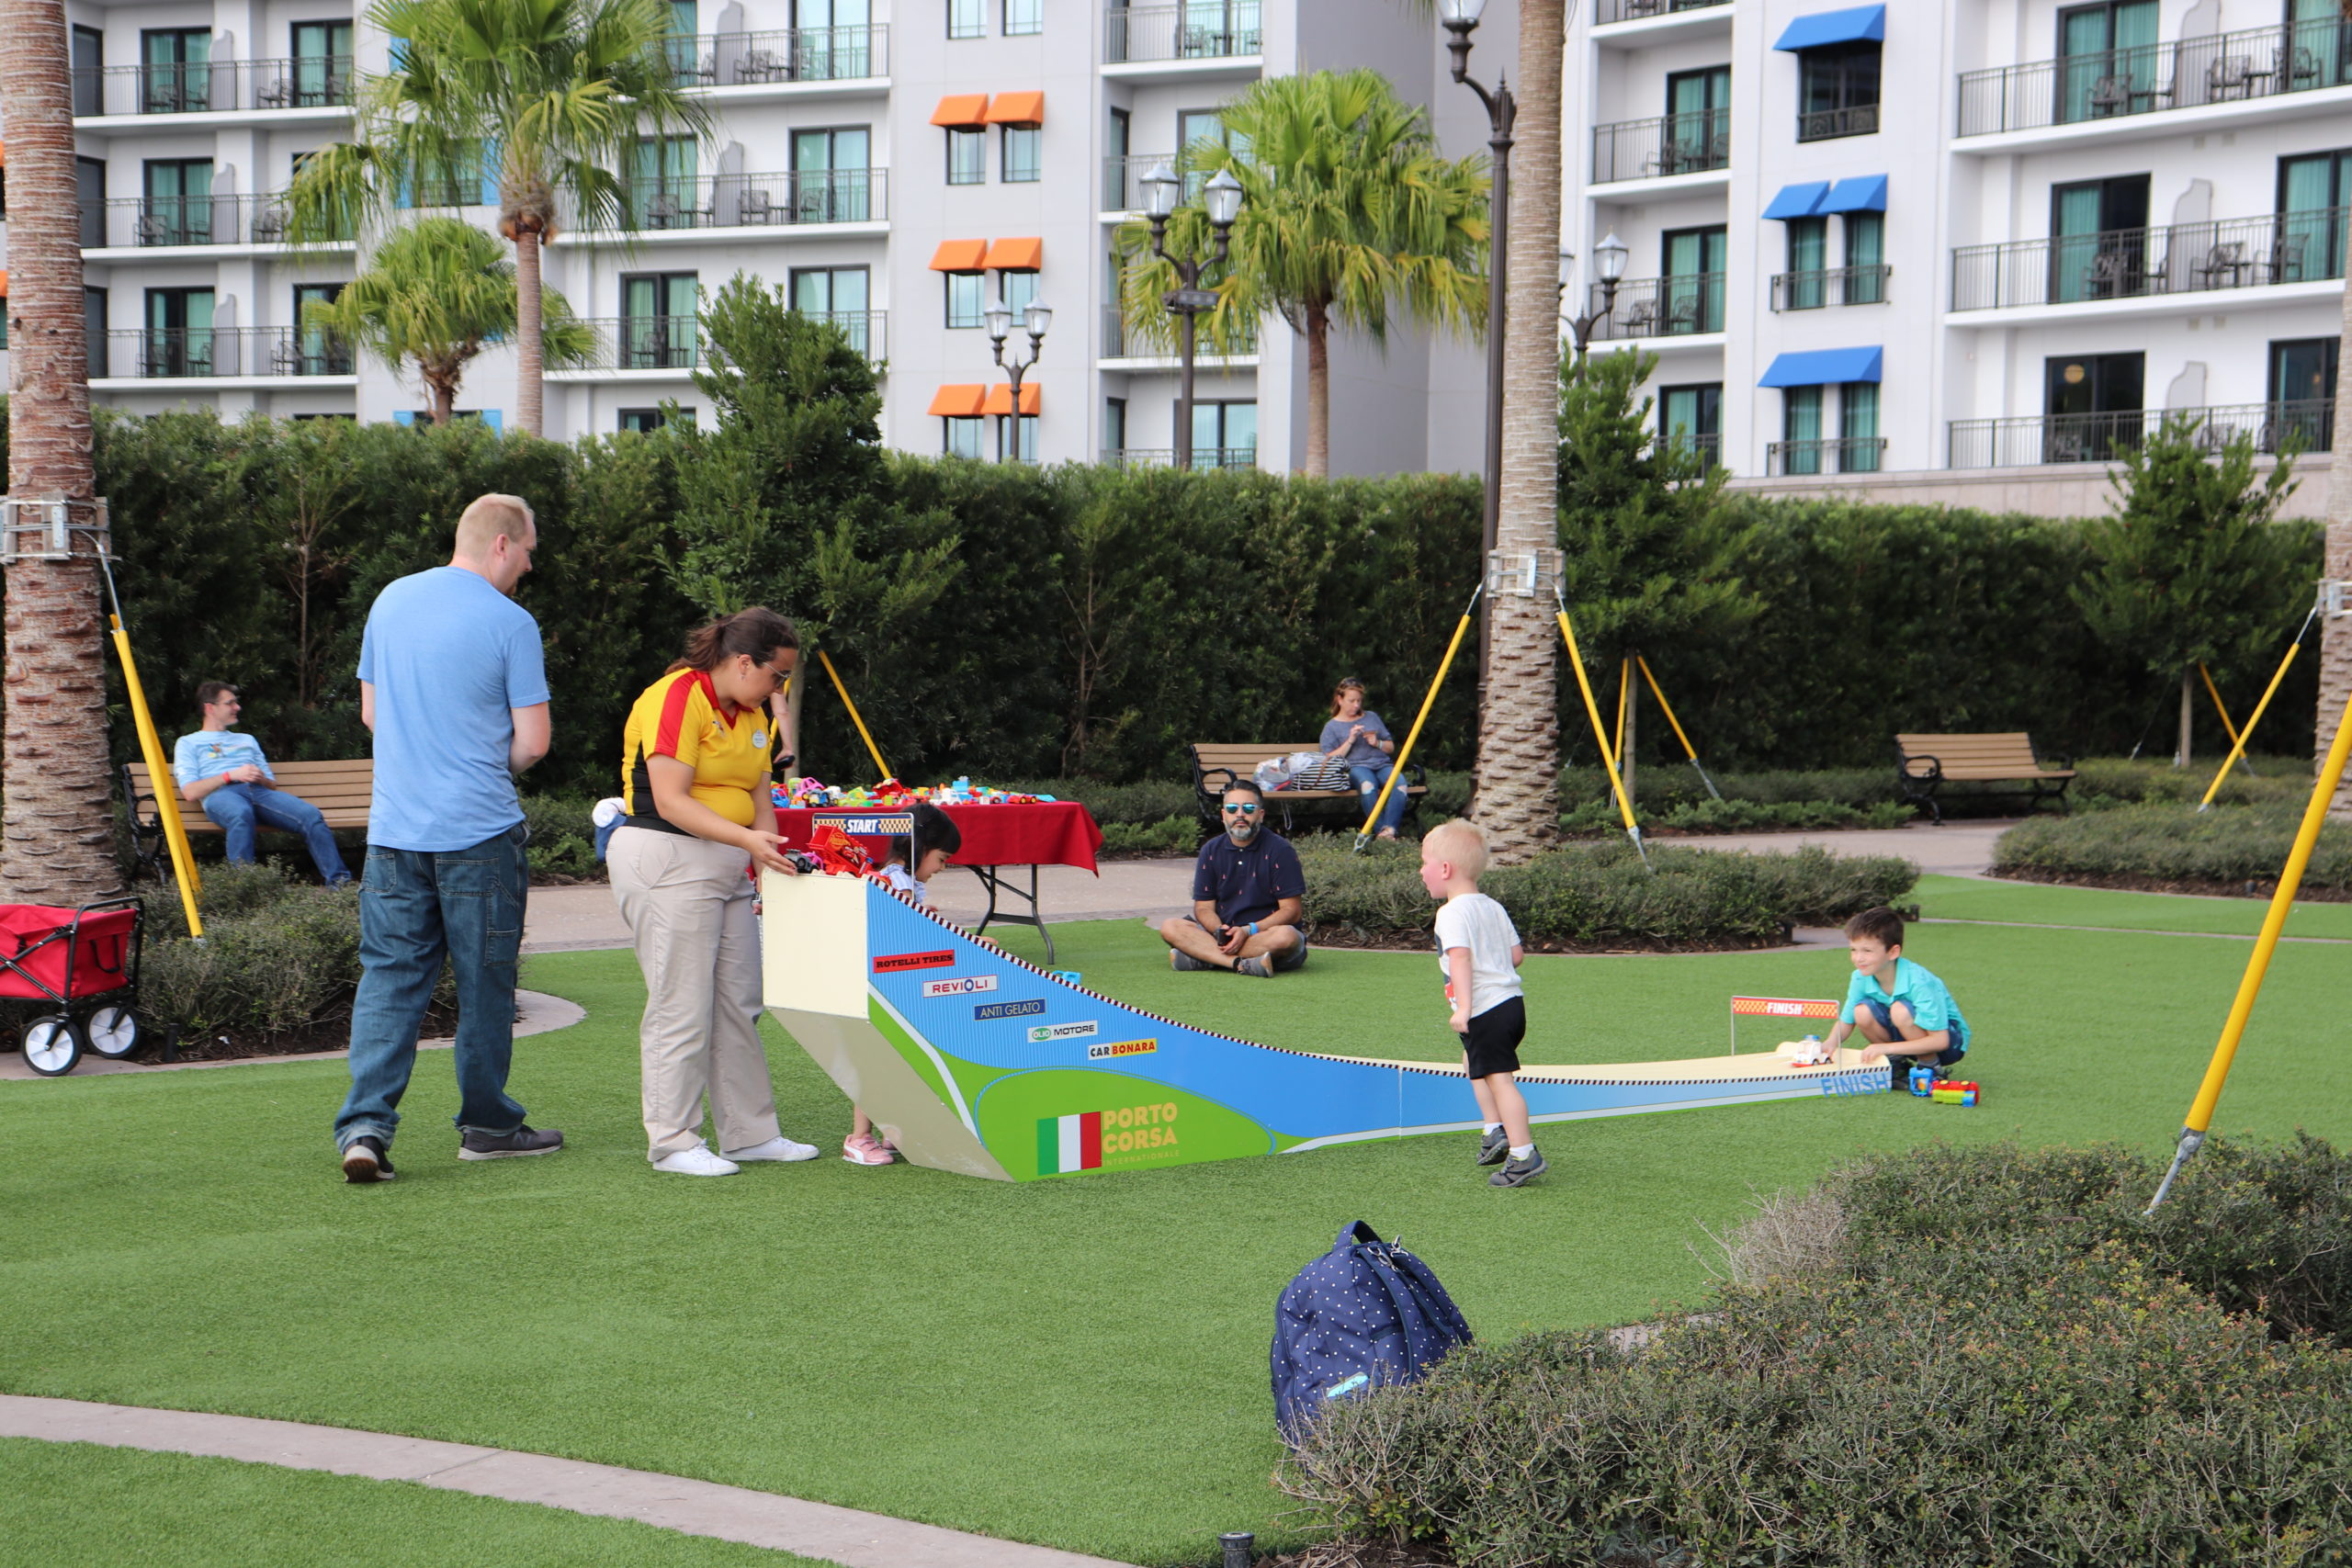 Children Playing on the Lawn at Disney's Riviera Resort